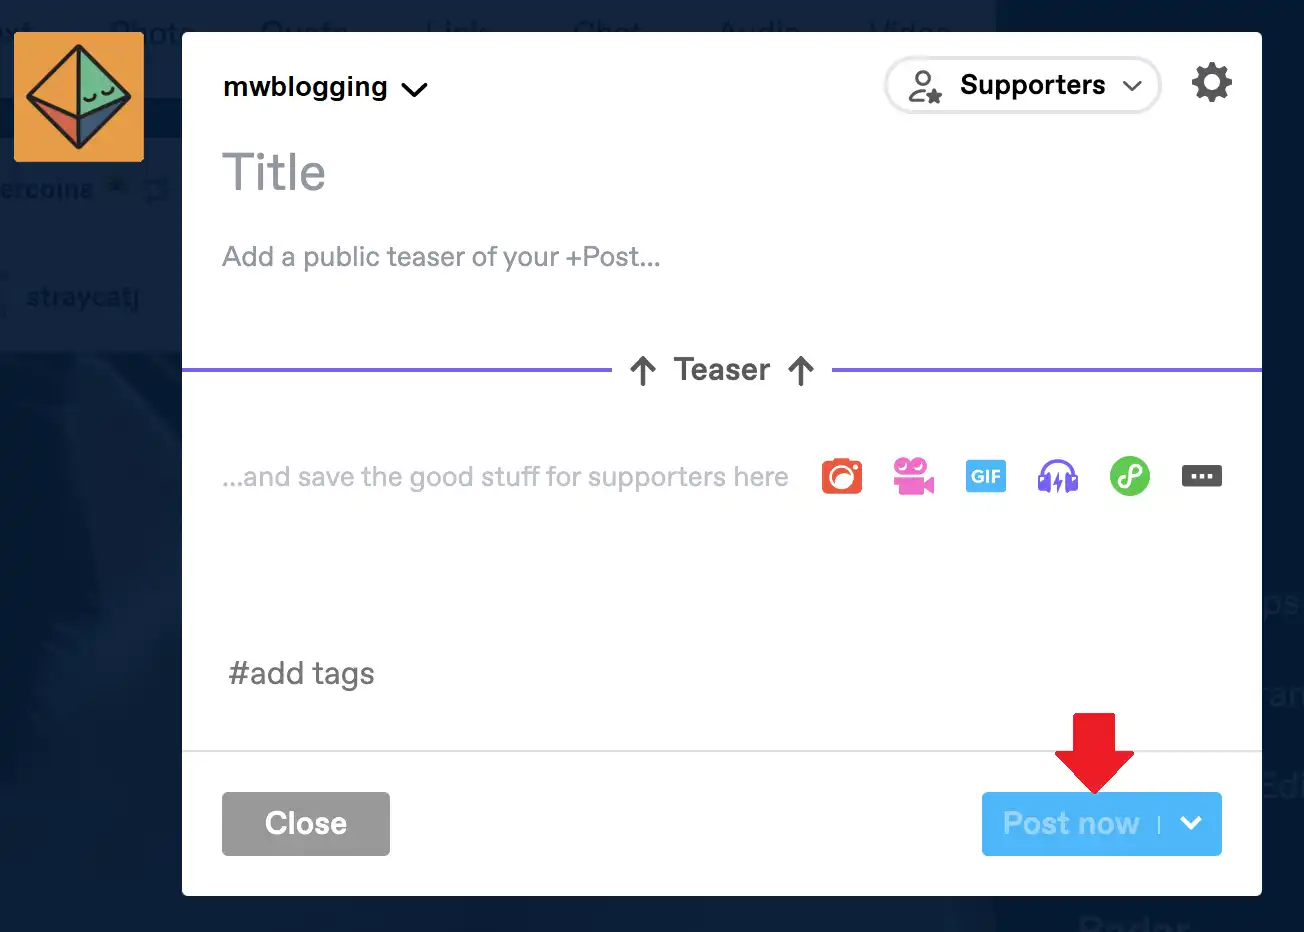 As you will choose Supporters it will add divider in the post editor. Anything written or added above the divider will be a teaser for non-supporters, as shown in the Section 1 above. Click the Post now button to publish it.